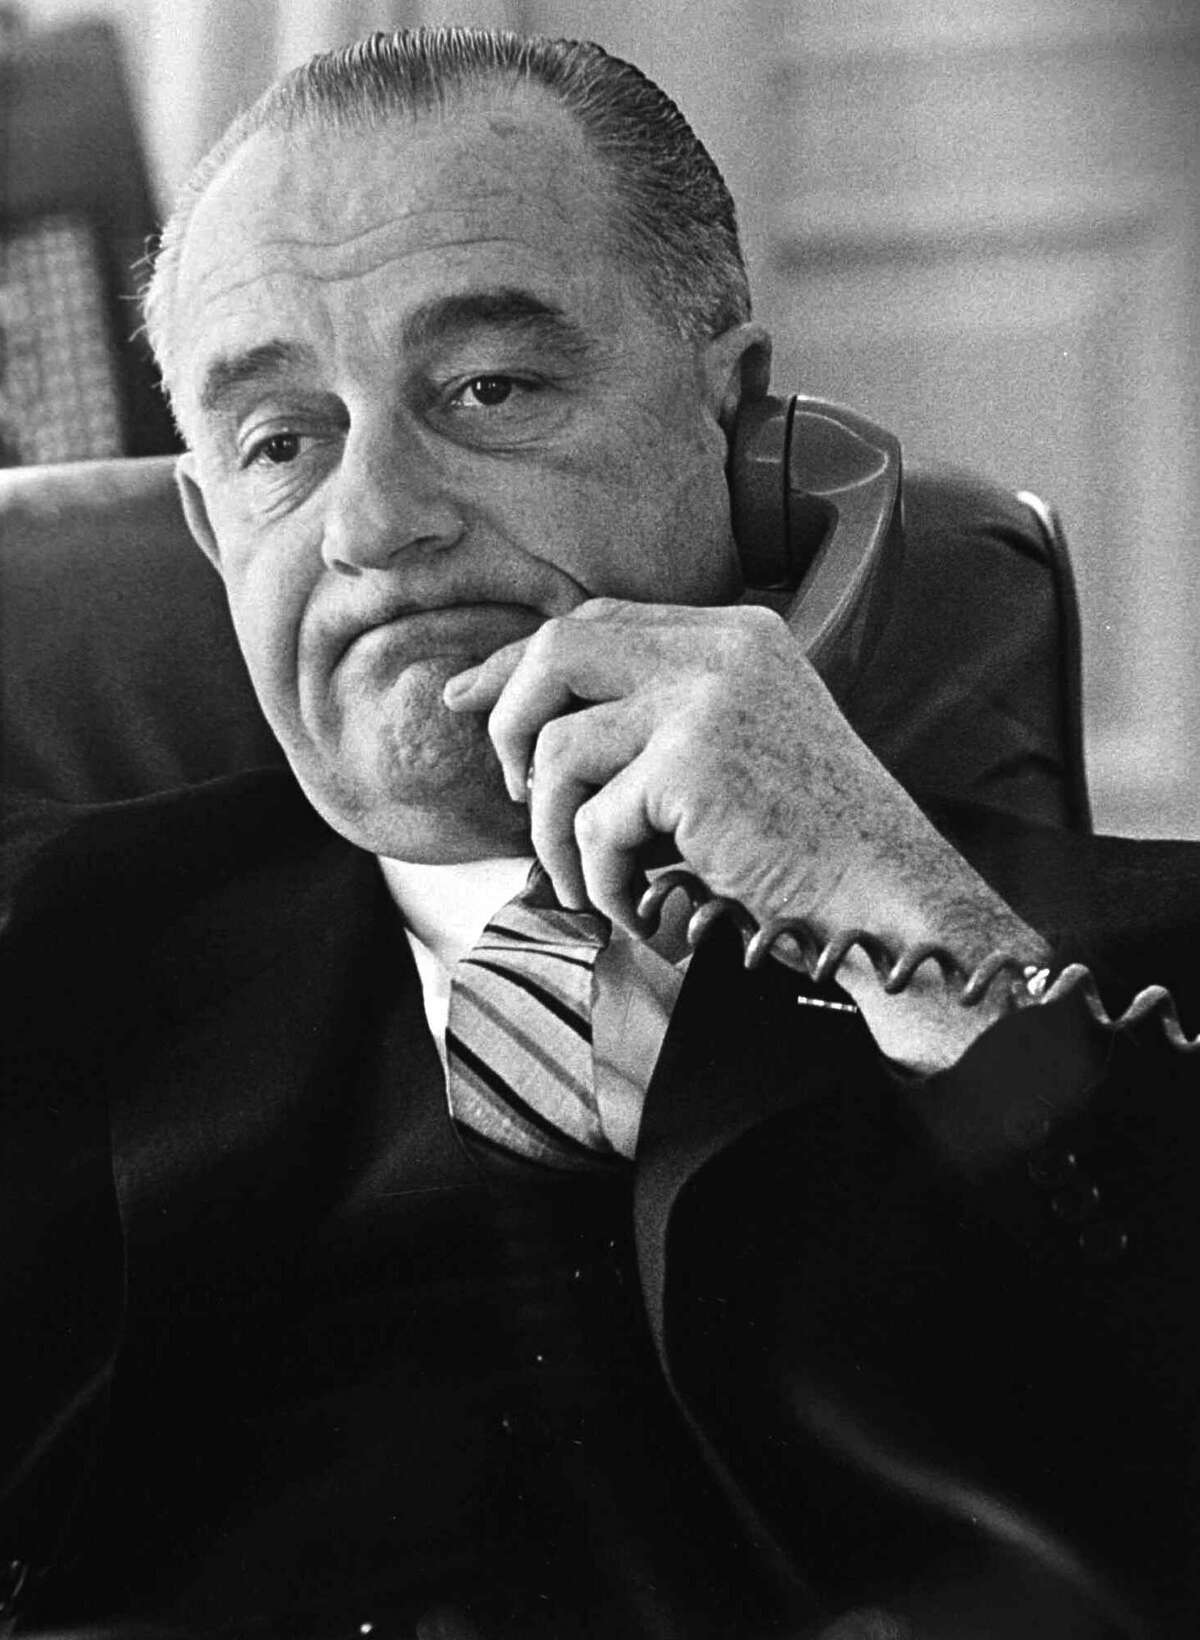 President Lyndon Baines Johnson attended Southwest Texas State Teachers' College and taught at several schools in Texas, including a class of poor Mexican-American students. He later reflected on his experience there after passing the Higher Education Act of 1965: "I shall never forget the faces of the boys and the girls in that little Welhausen Mexican School, and I remember even yet the pain of realizing and knowing then that college was closed to practically every one of those children because they were too poor. And I think it was then that I made up my mind that this nation could never rest while the door to knowledge remained closed to any American."